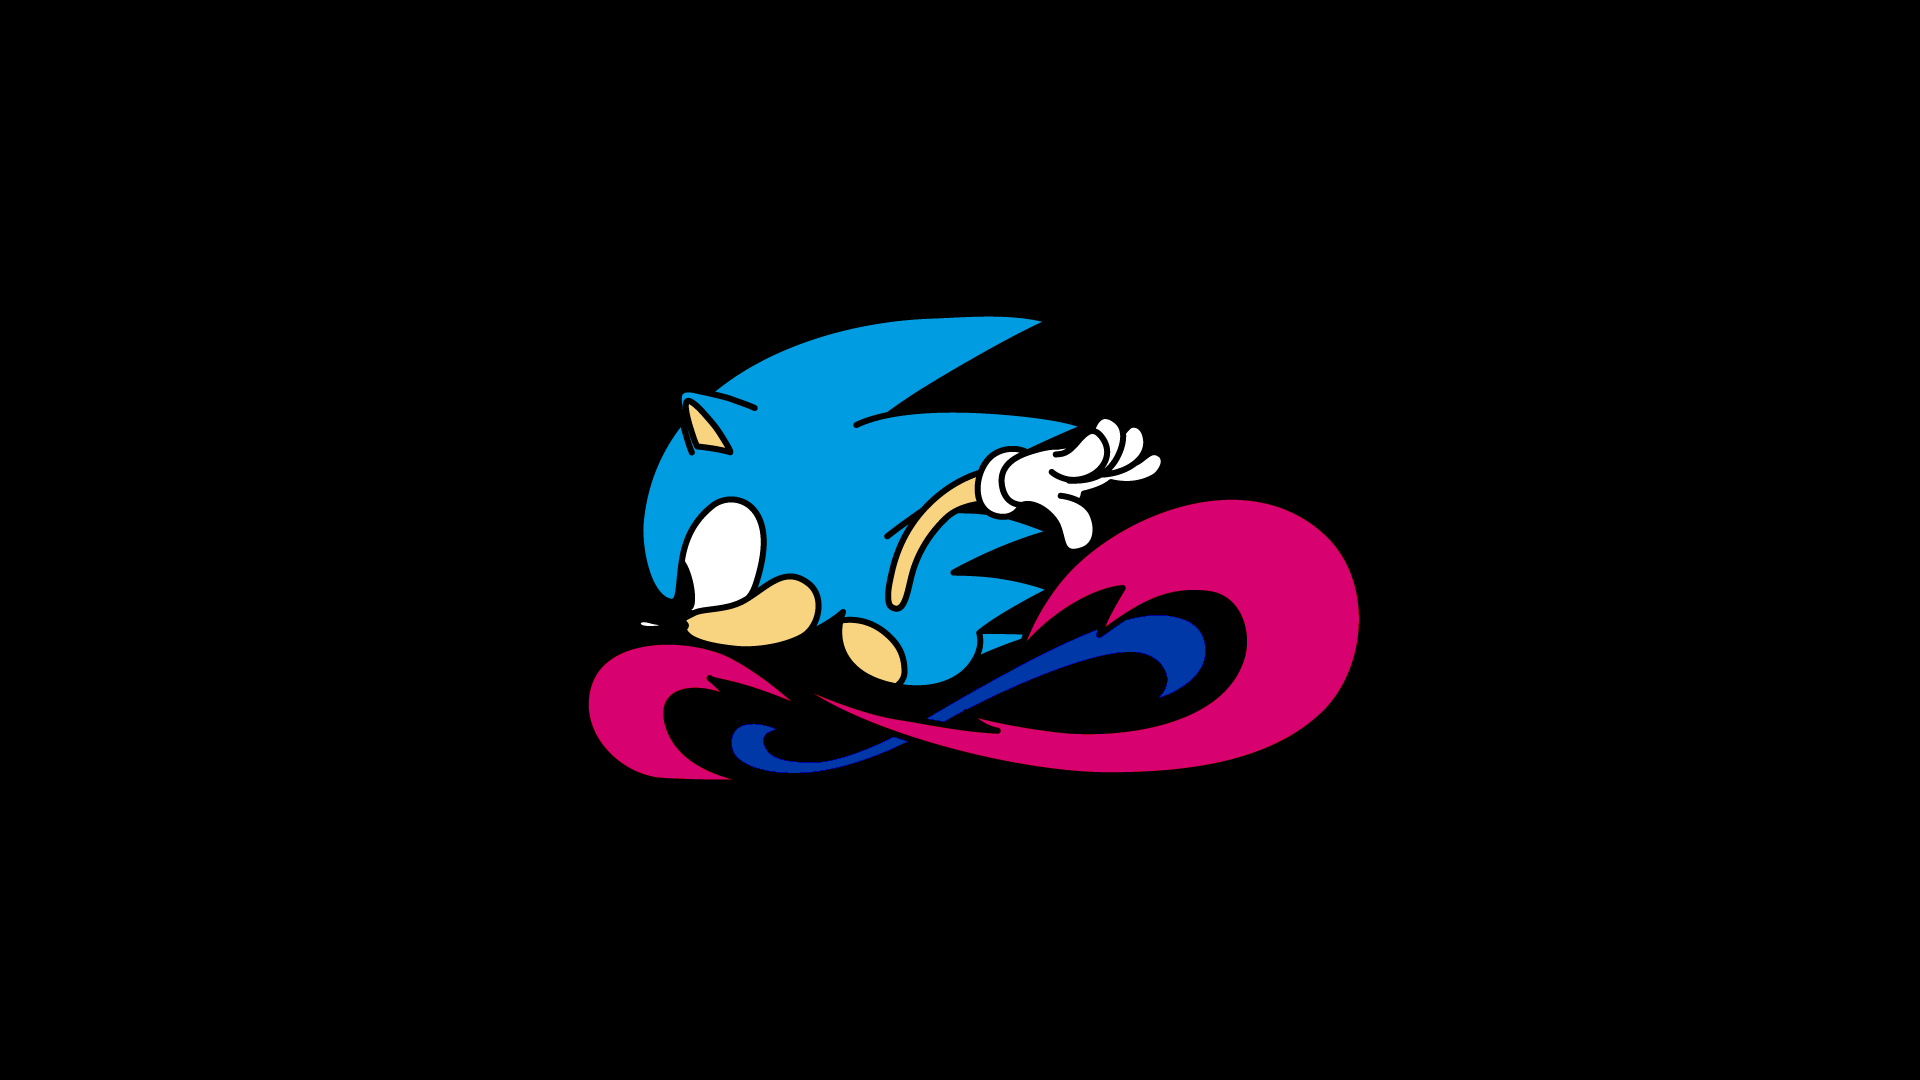 I made a minimalistic bi pride Sonic wallpapers for all you bi